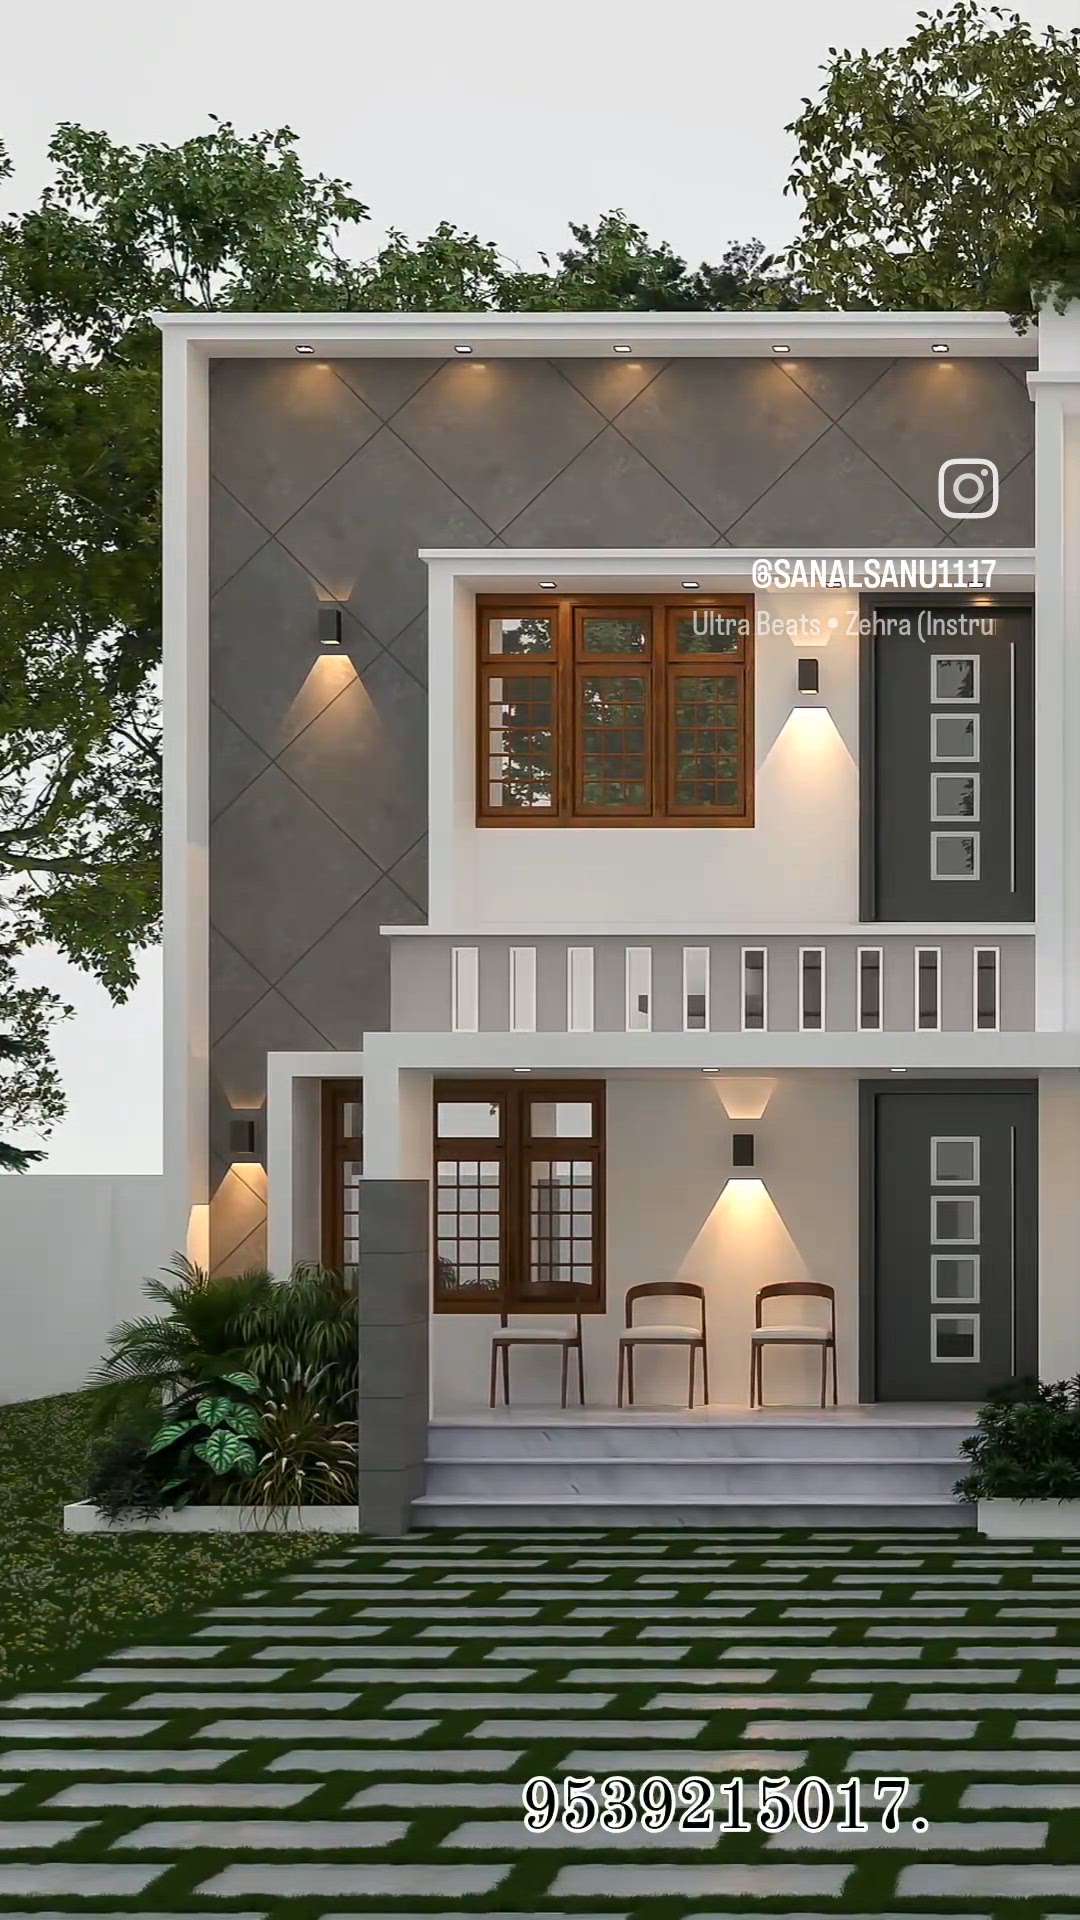 We Provide........ 

3D Elevation
3D interior
3D Plan
3D Landscapeing
2D Plan
Plan Approval
Completion Drawing
General Drawings 

Contact Us By 9539215017....
#3dvisualization
#3drender
#elevation
#homedesign
#keralahome
#contumprary home
#home design
#home interior
#dinning interior